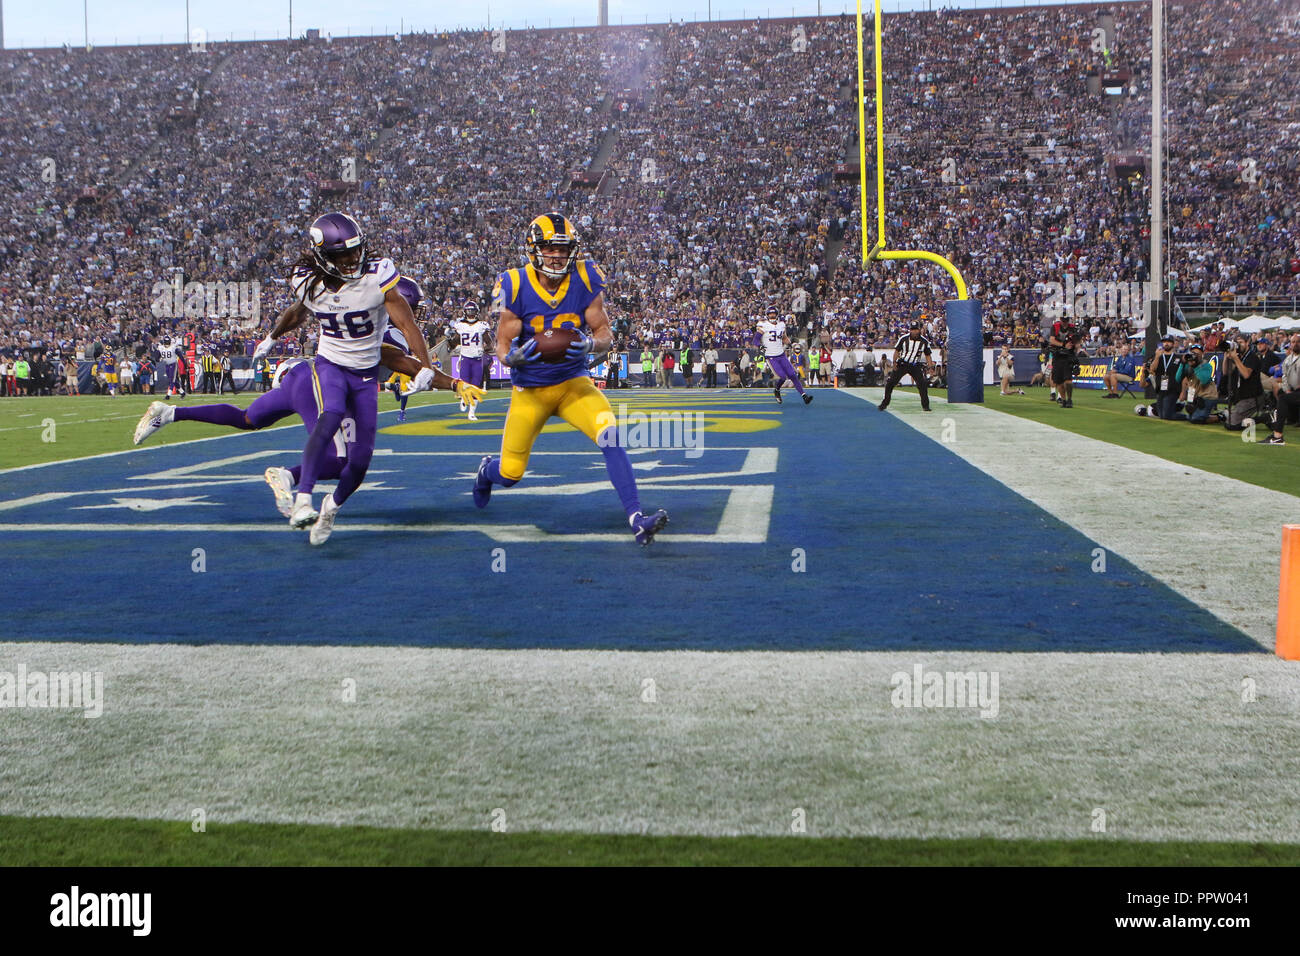 Los Angeles, CA, USA. 27th Sep, 2018. Los Angeles Rams wide receiver Cooper Kupp (18) with catch in the endzone during the NFL Minnesota Vikings vs Los Angeles Rams at the Los Angeles Memorial Coliseum in Los Angeles, Ca on September 27, 2018. Jevone Moore Credit: csm/Alamy Live News Stock Photo